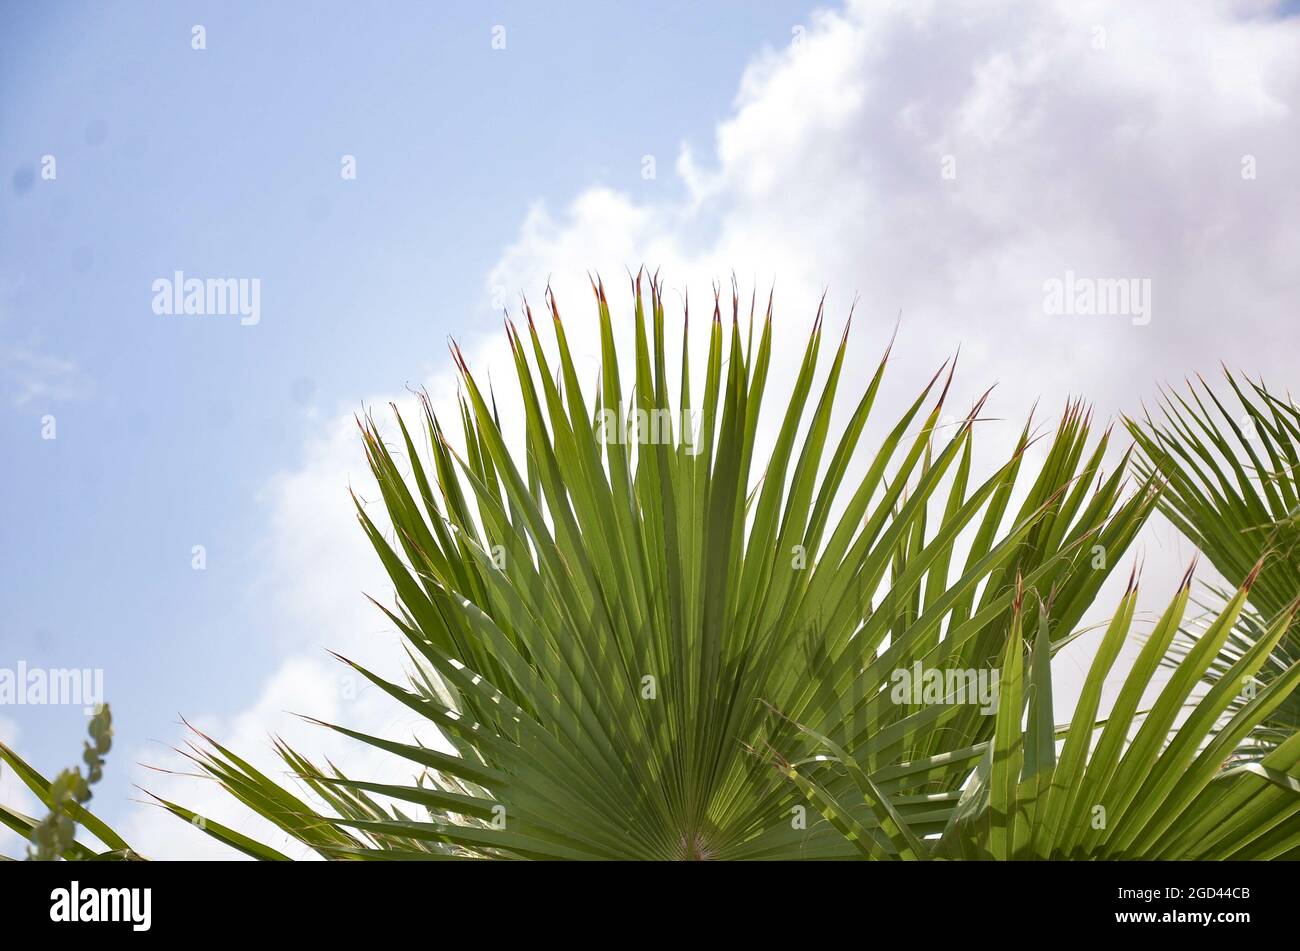 Top of the Mexican fan palm in the cloudy sky background Stock Photo